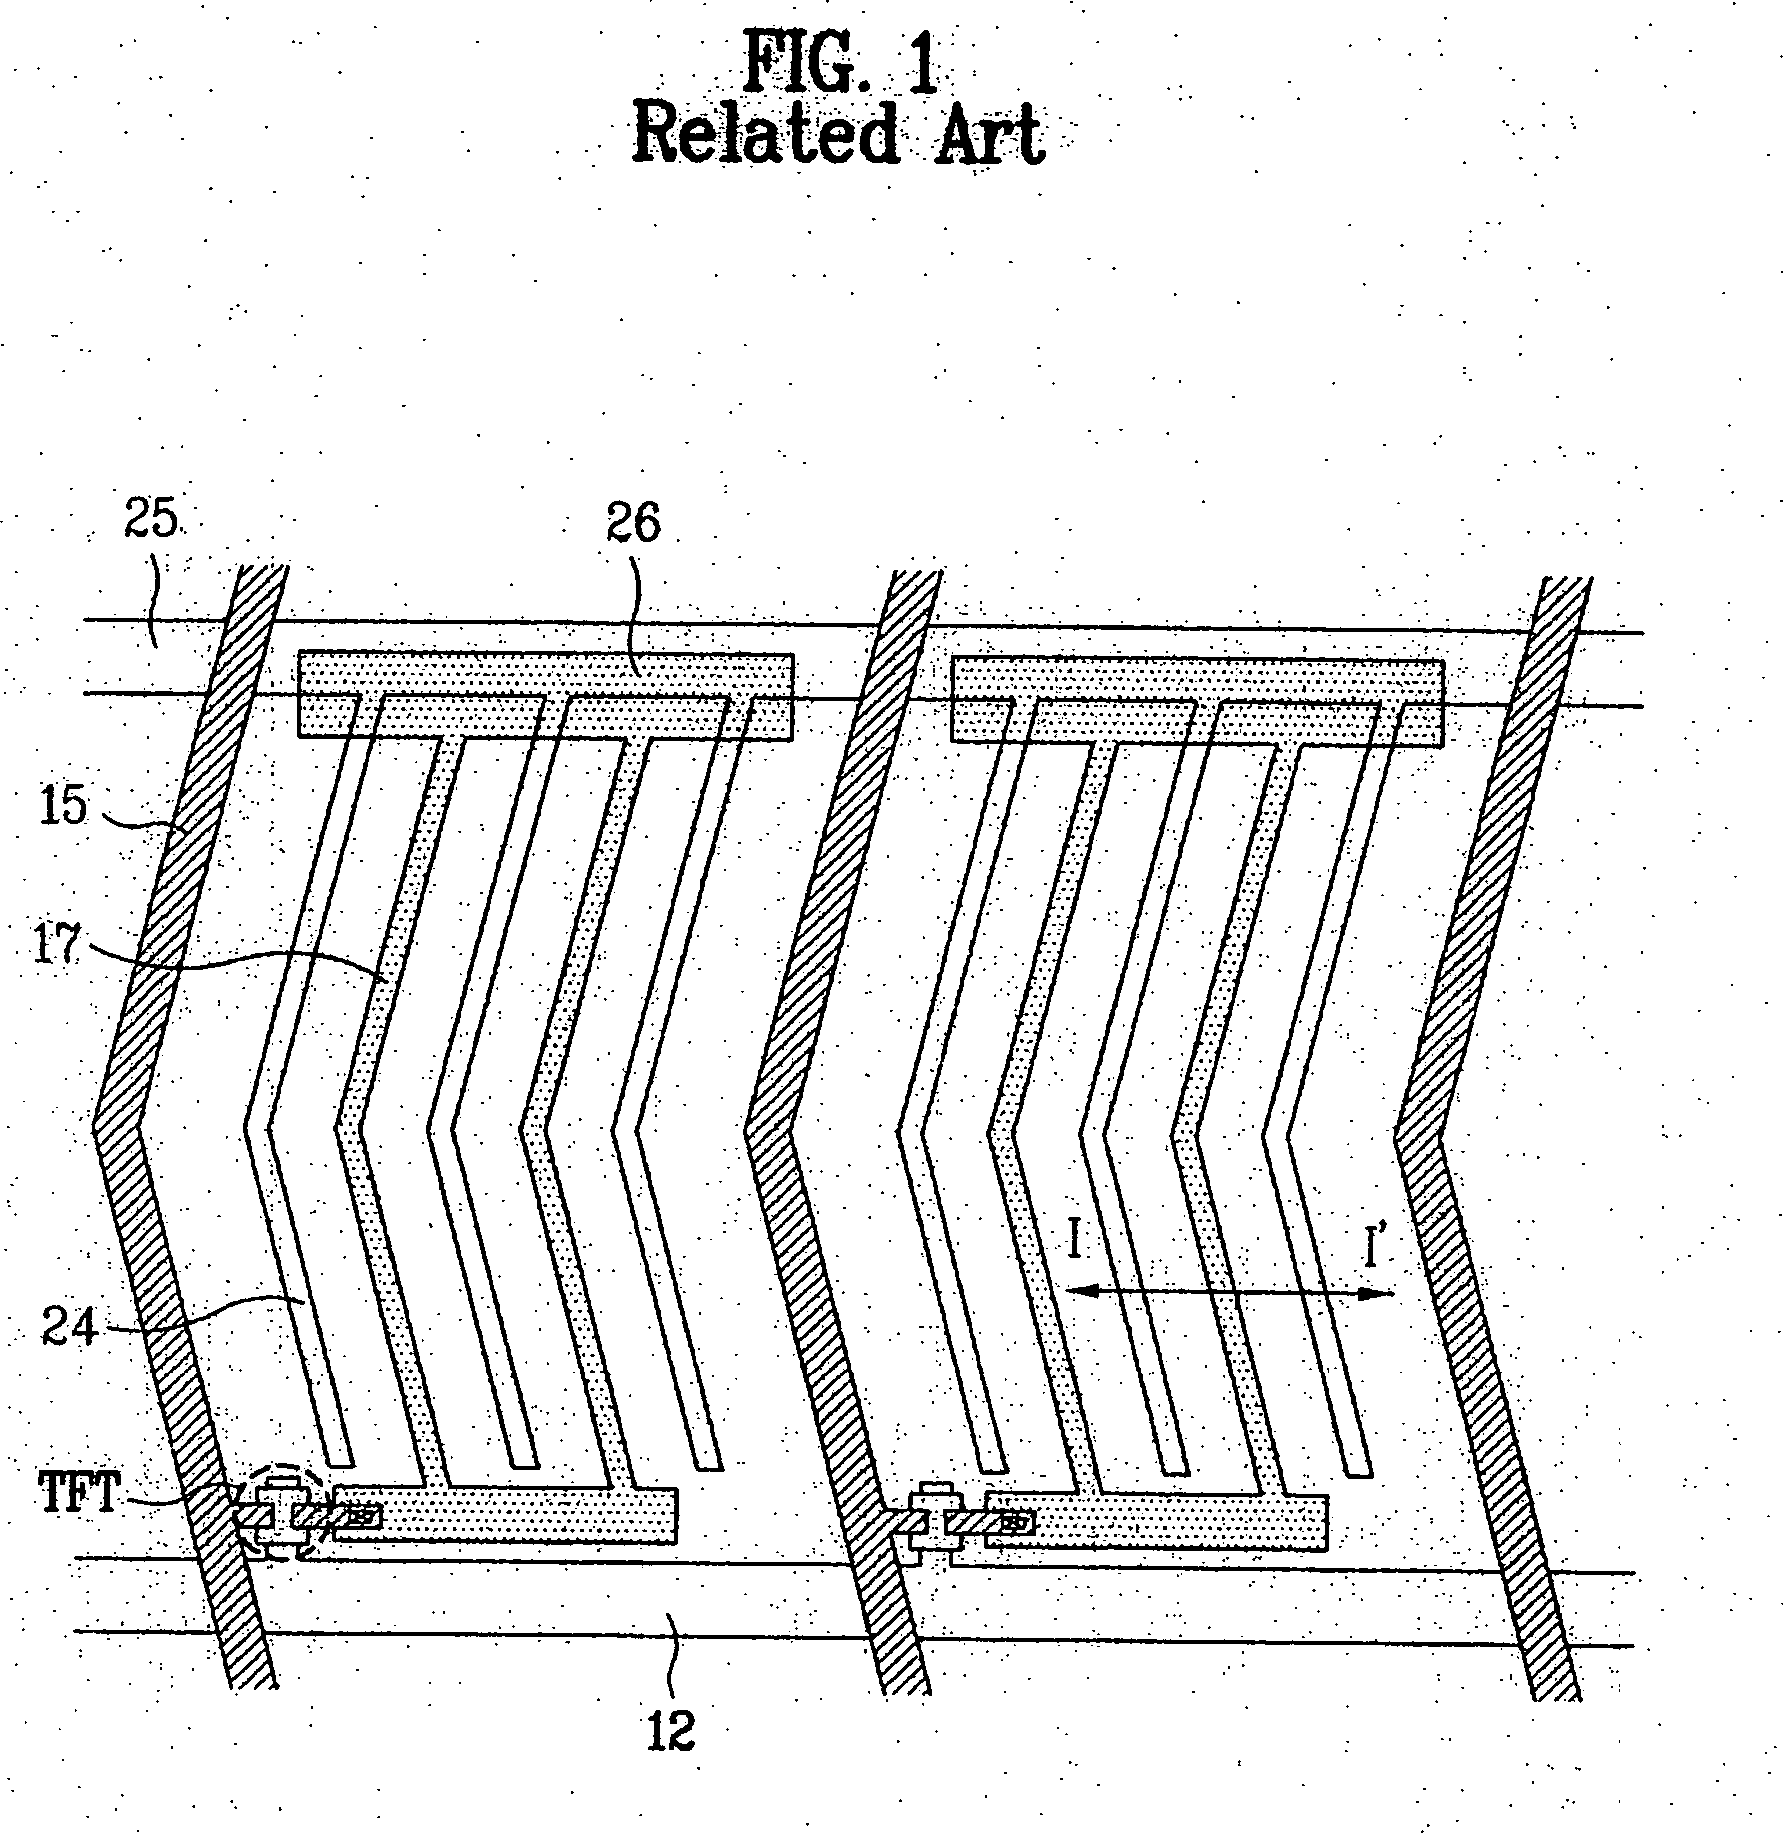 In-plane switching mode liquid crystal display device